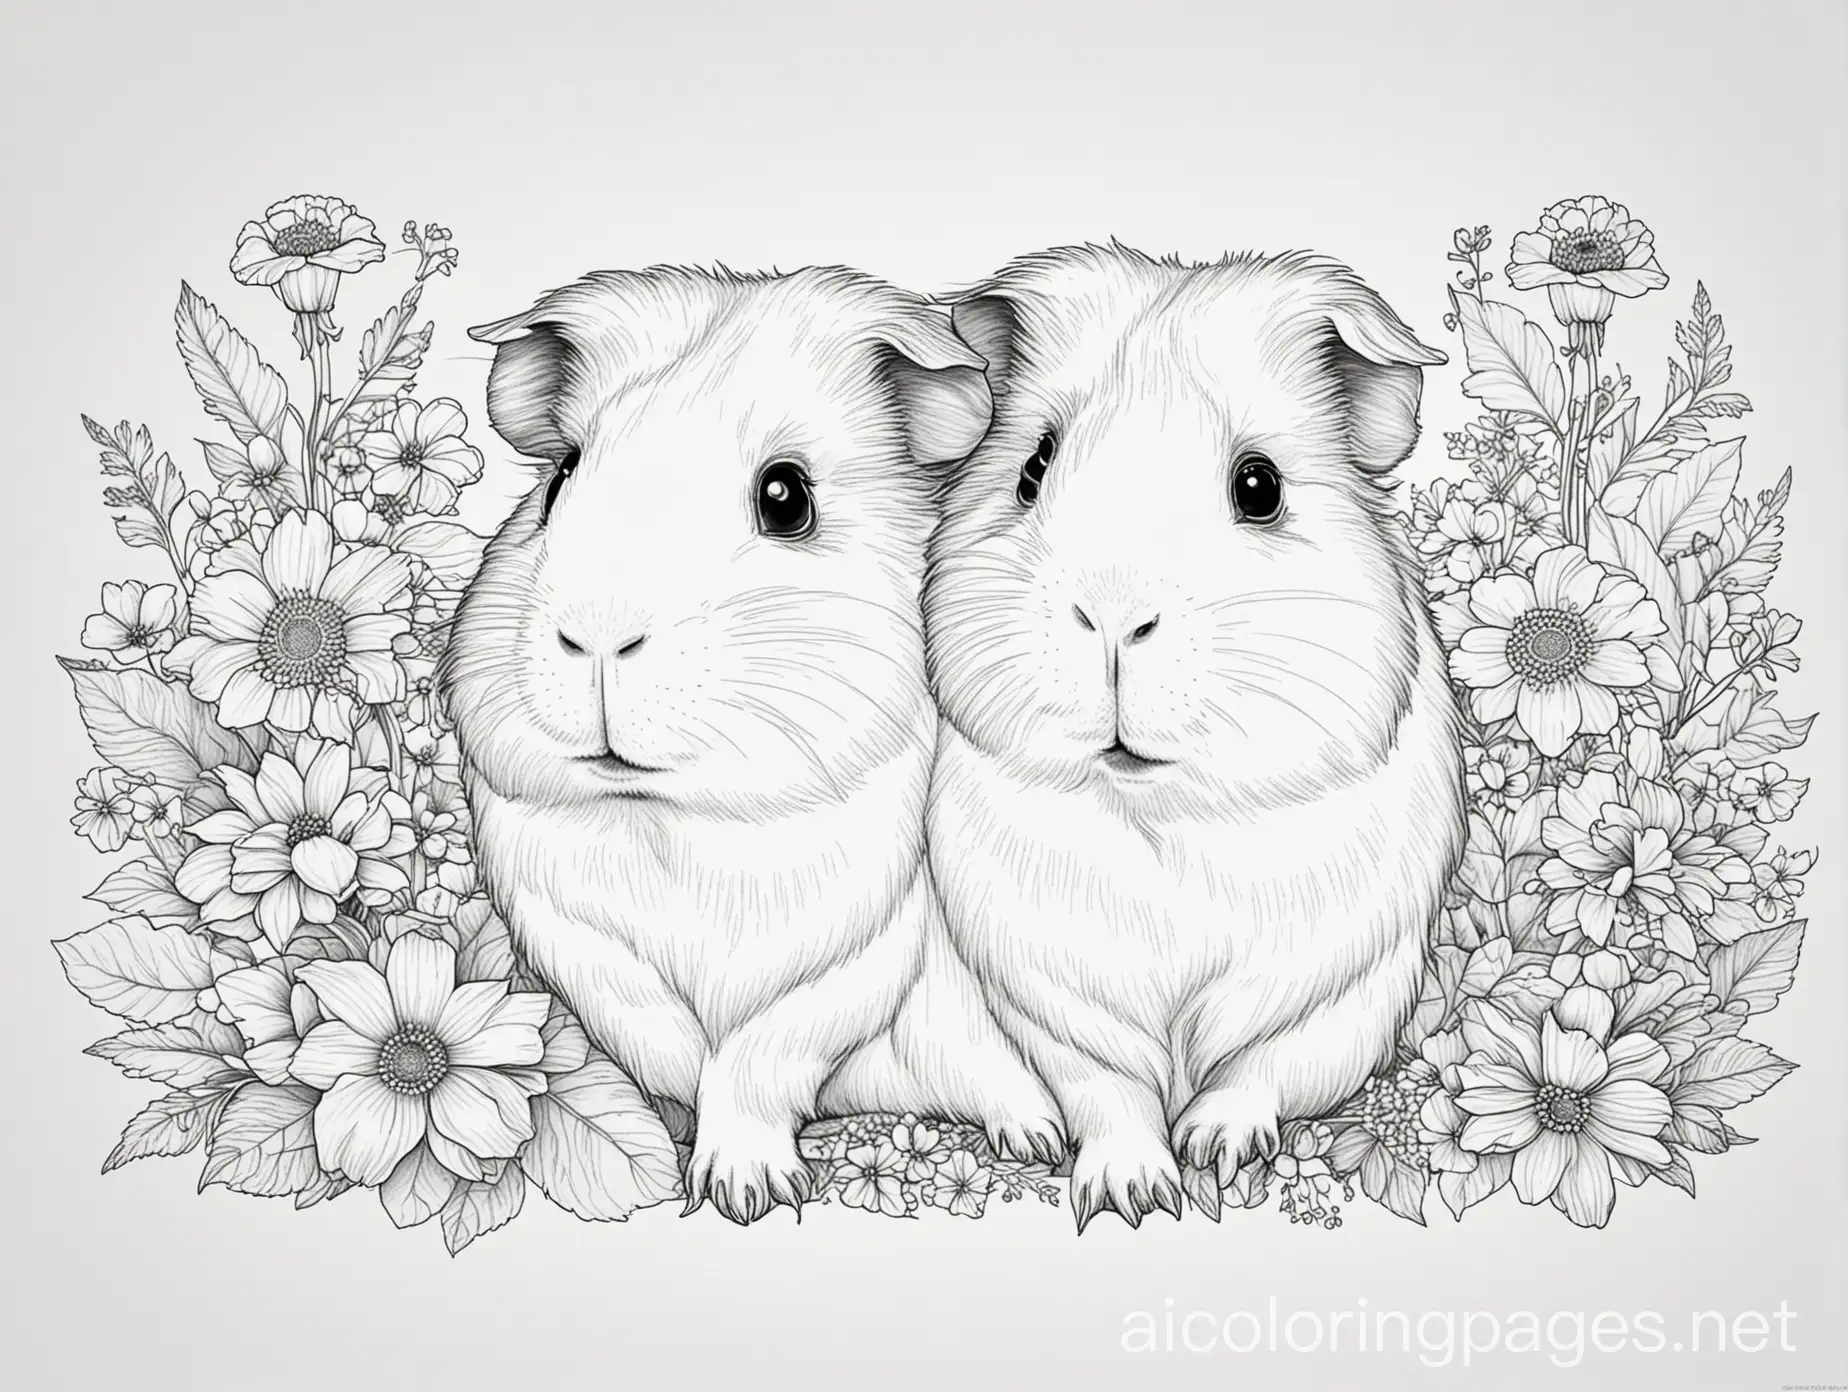 Guinea pig with flowers, Coloring Page, black and white, line art, white background, Simplicity, Ample White Space. The background of the coloring page is plain white to make it easy for young children to color within the lines. The outlines of all the subjects are easy to distinguish, making it simple for kids to color without too much difficulty